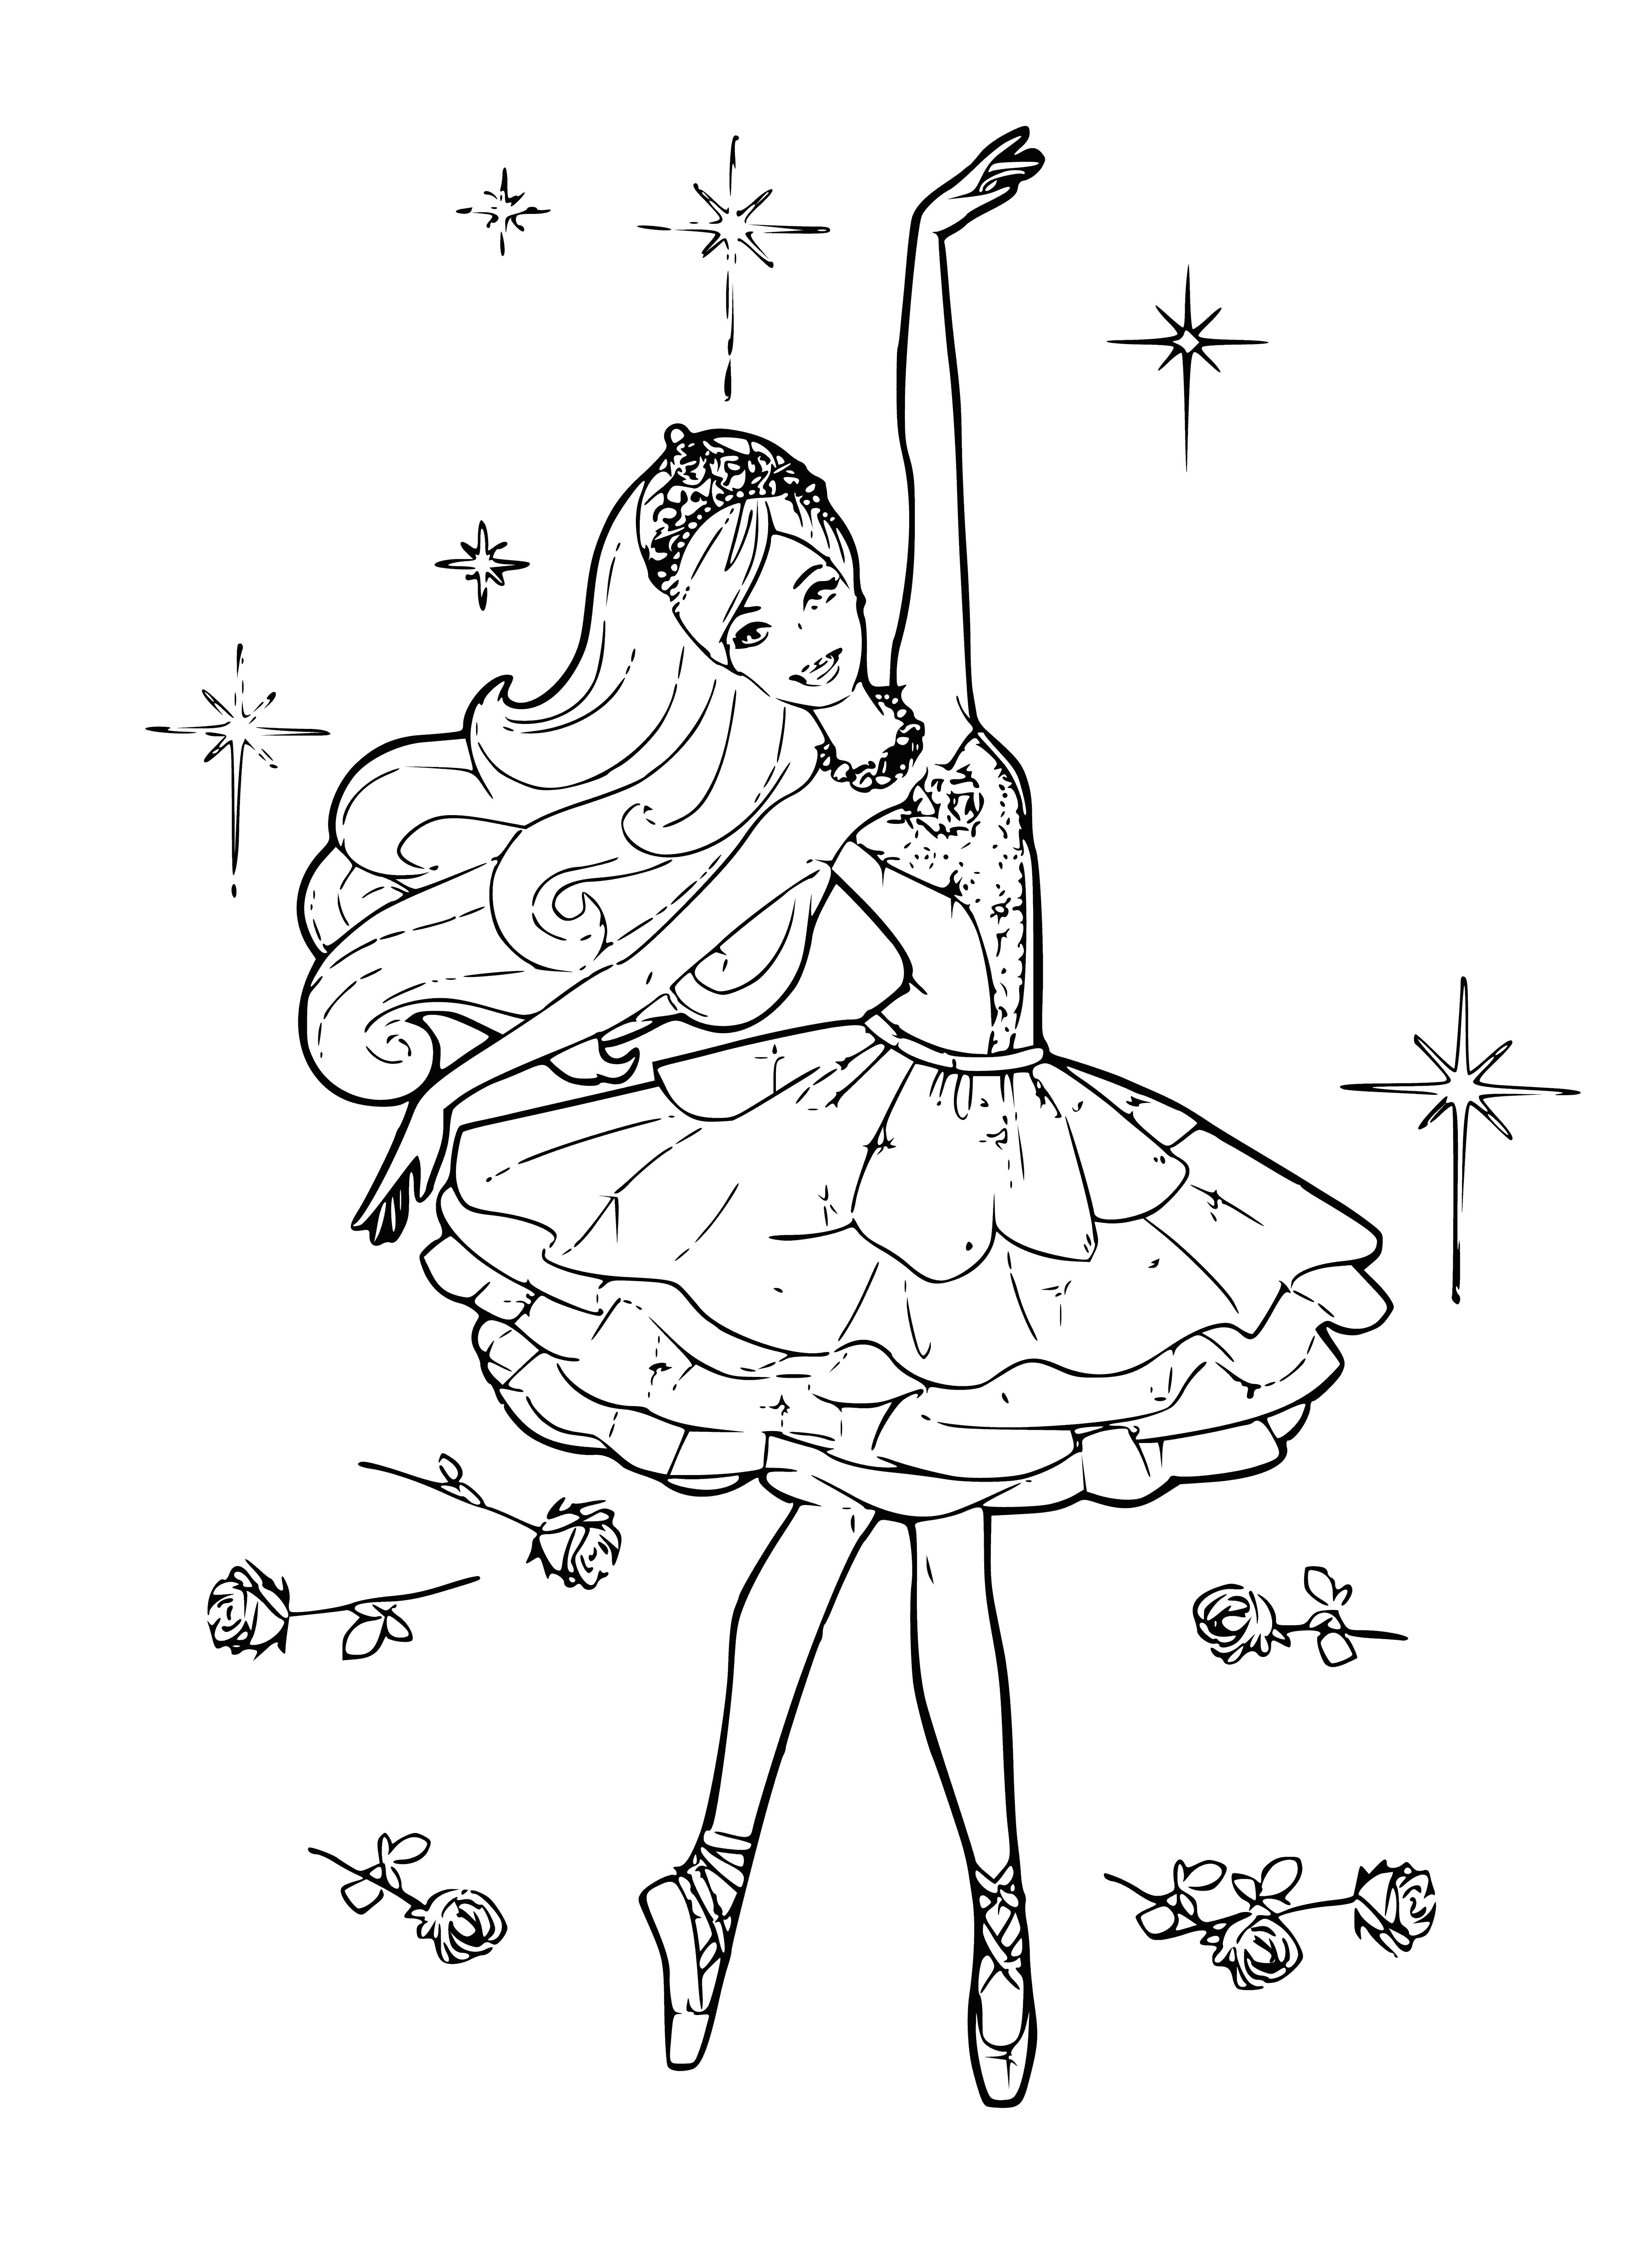 Ballerina Barbie on stage coloring page